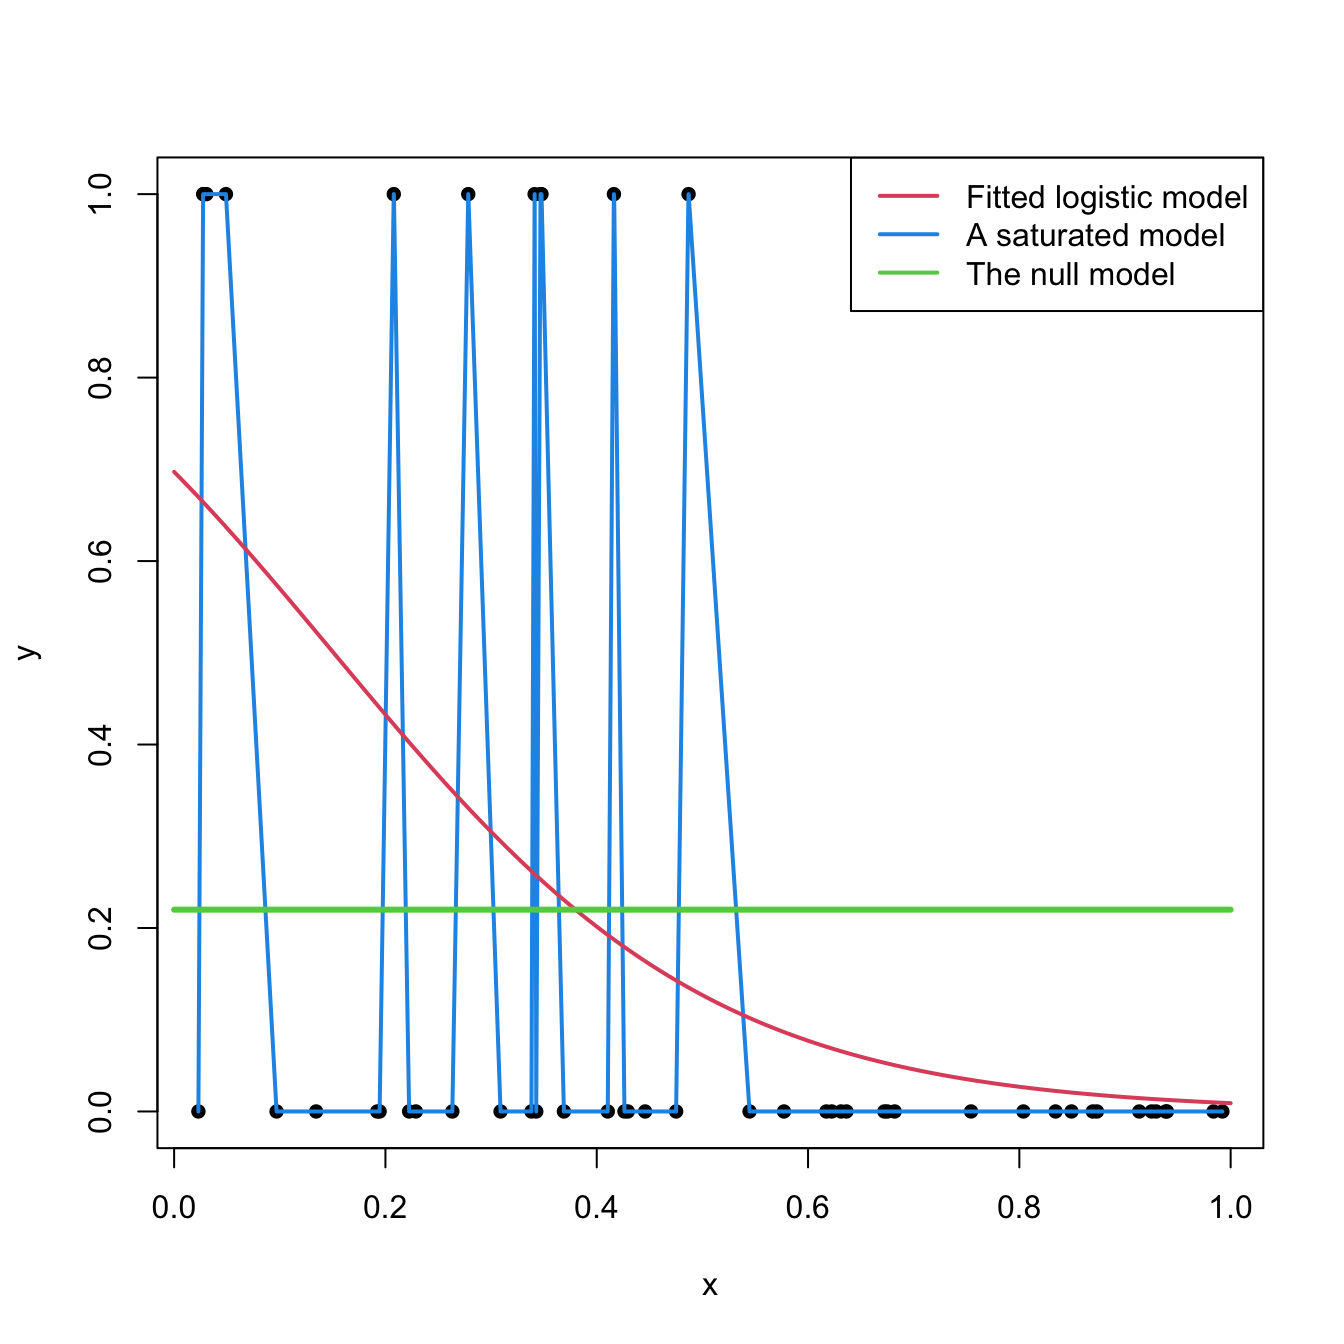 Fitted logistic regression versus a saturated model and the null model.